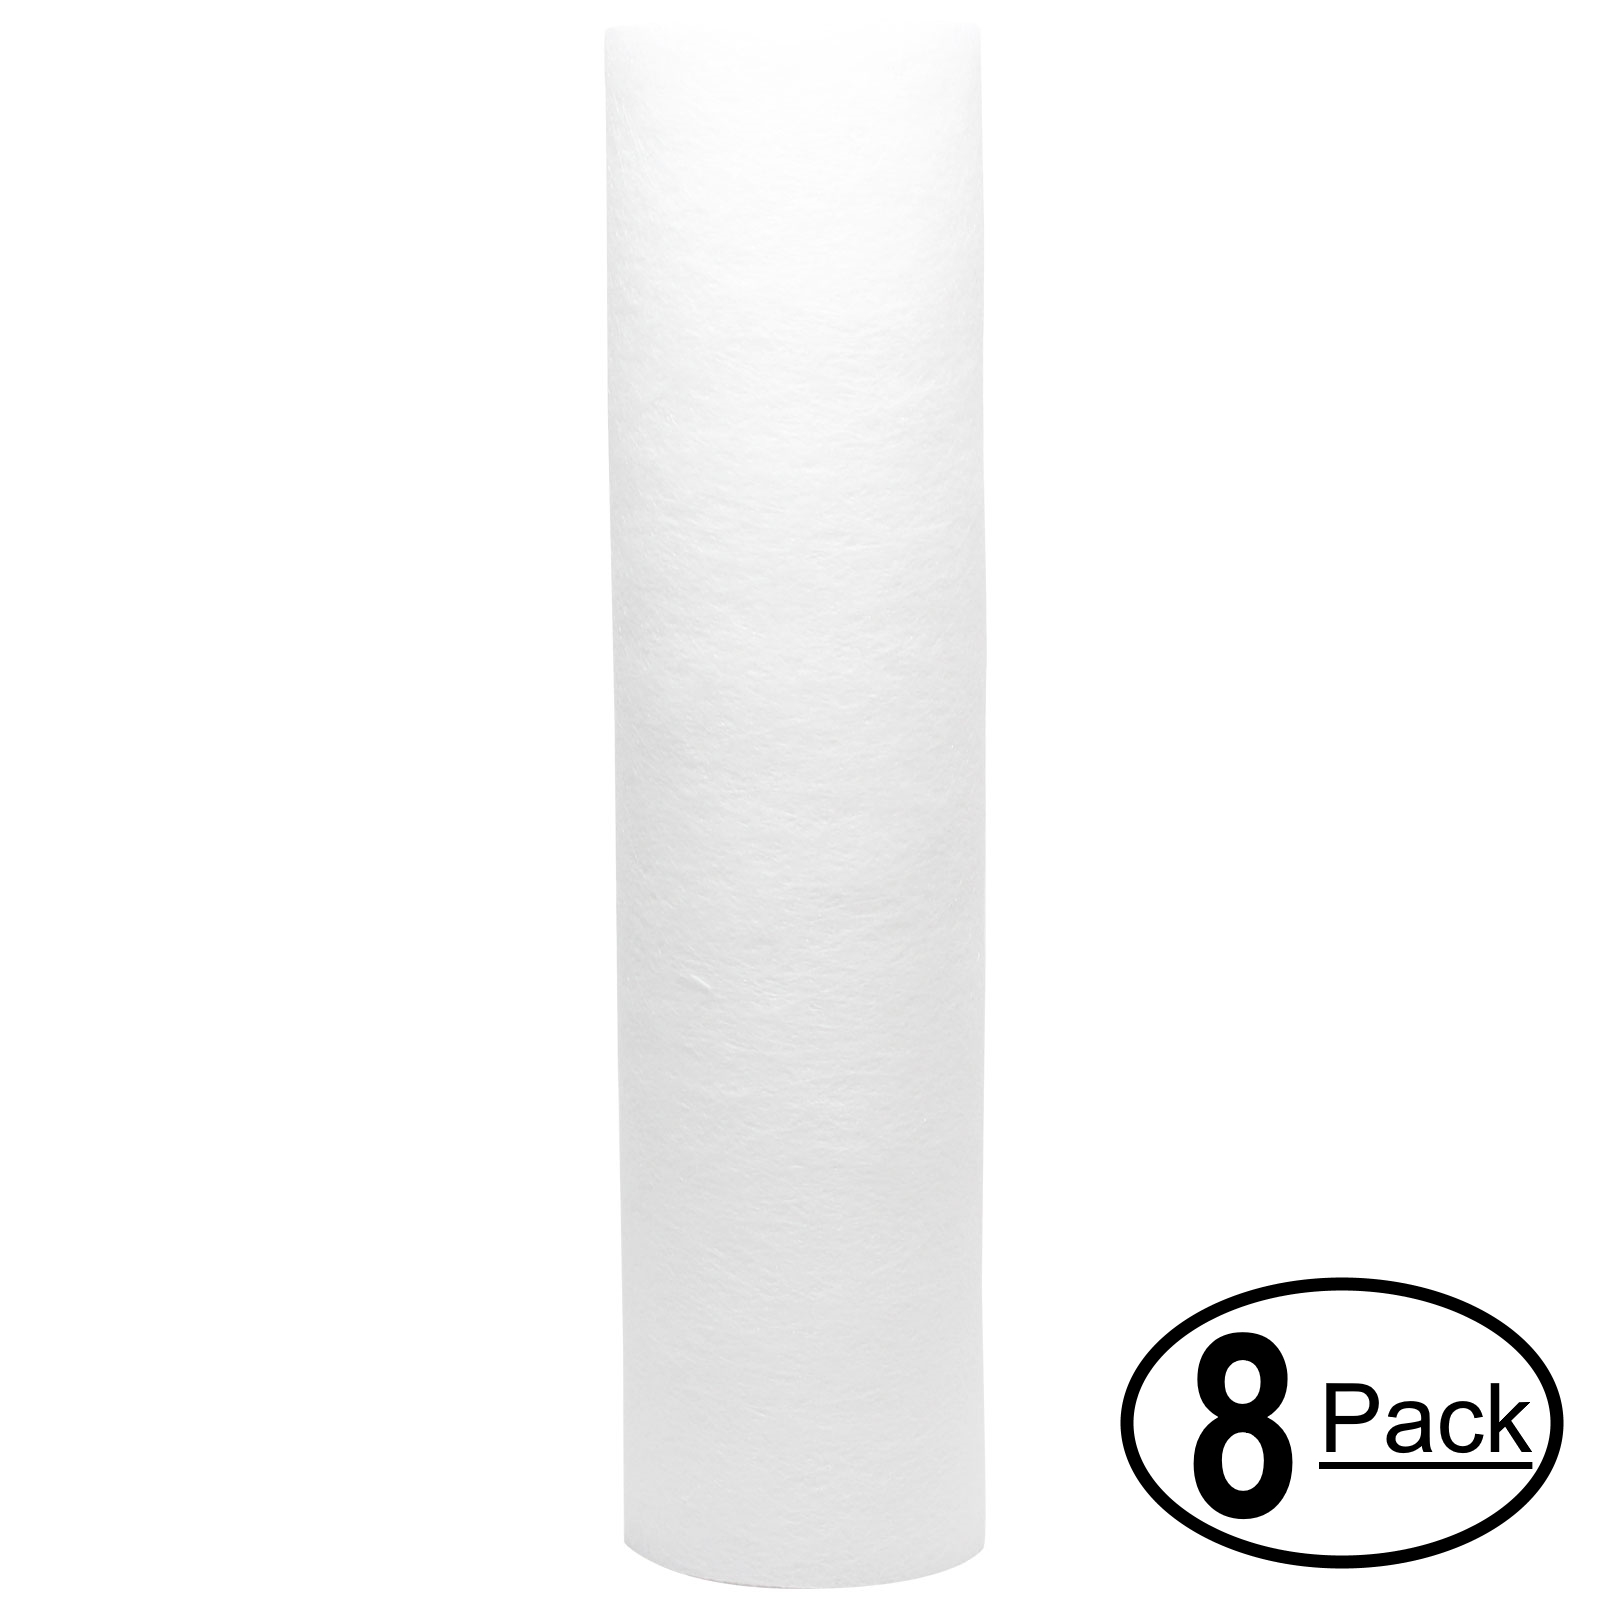 8-Pack Replacement for Watts CT-1 Polypropylene Sediment Filter - Universal 10-inch 5-Micron Cartridge for WATTS PREMIER 500515 CT-1 DRINKING WATER SYSTEM - Denali Pure Brand - image 1 of 4